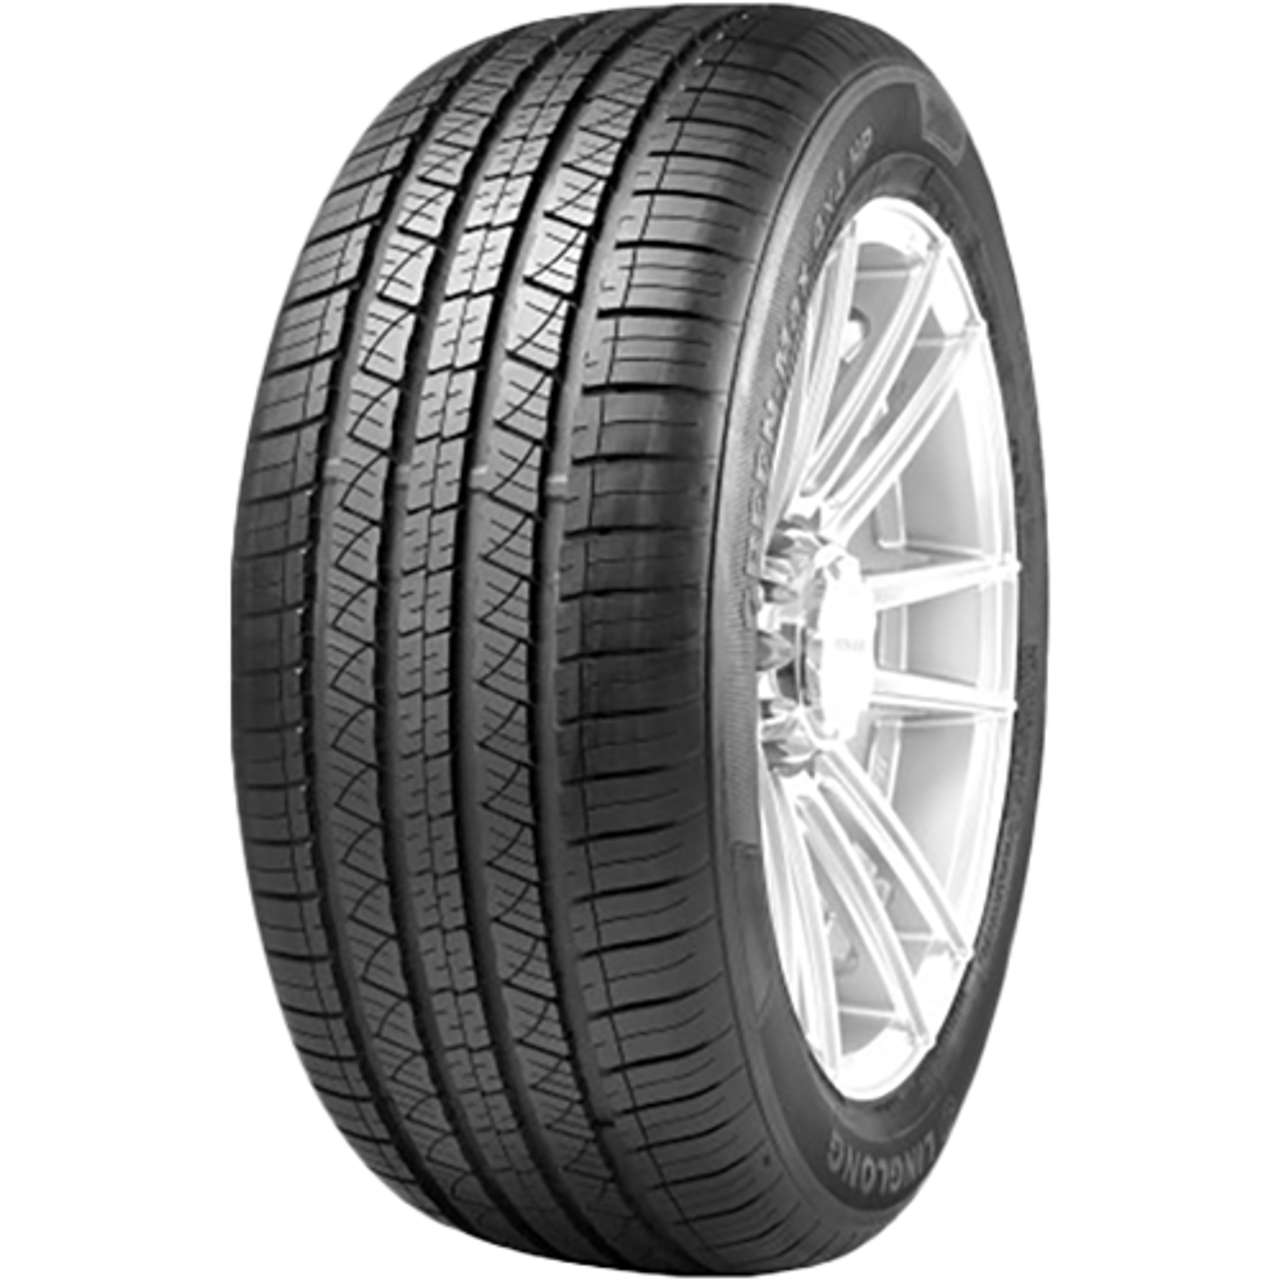 LINGLONG GREEN-MAX 4X4 HP 225/60R18 100H BSW von LINGLONG